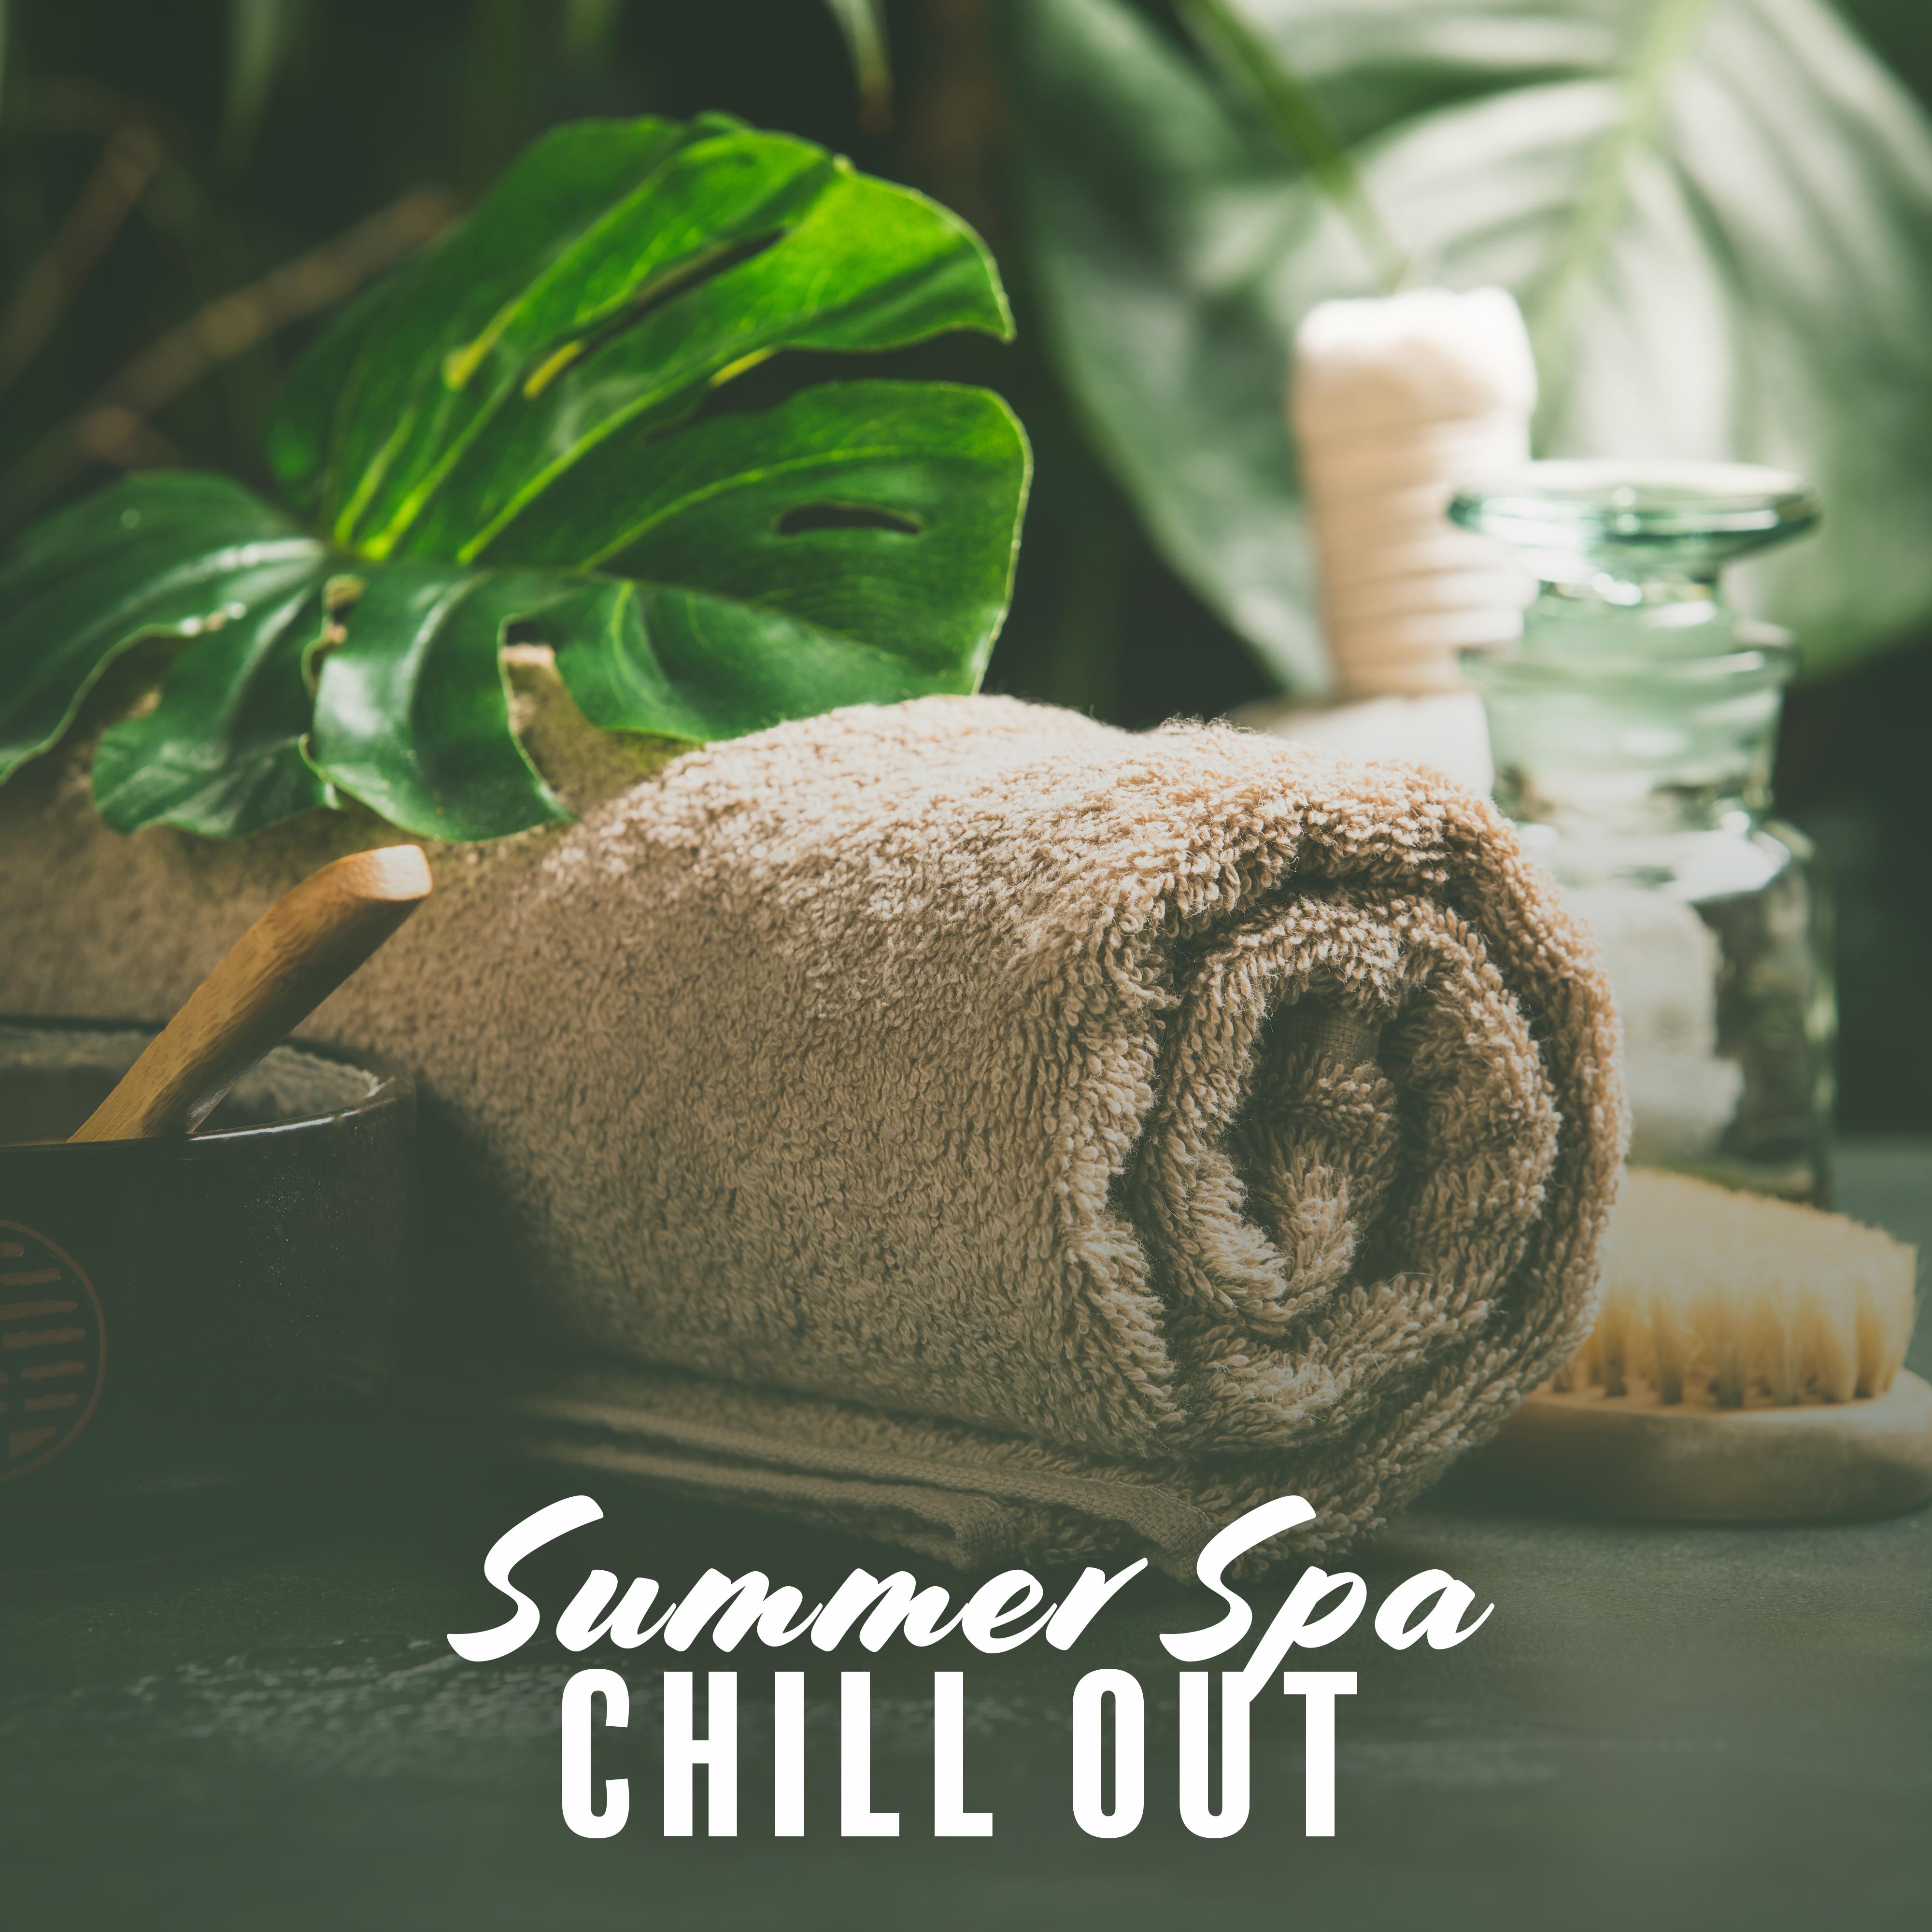 Summer Spa Chill Out: Relaxing Sounds for Massage, Delicate Chillout Melodies for Spa, Beautifying, Relaxing and Regenerating Treatments